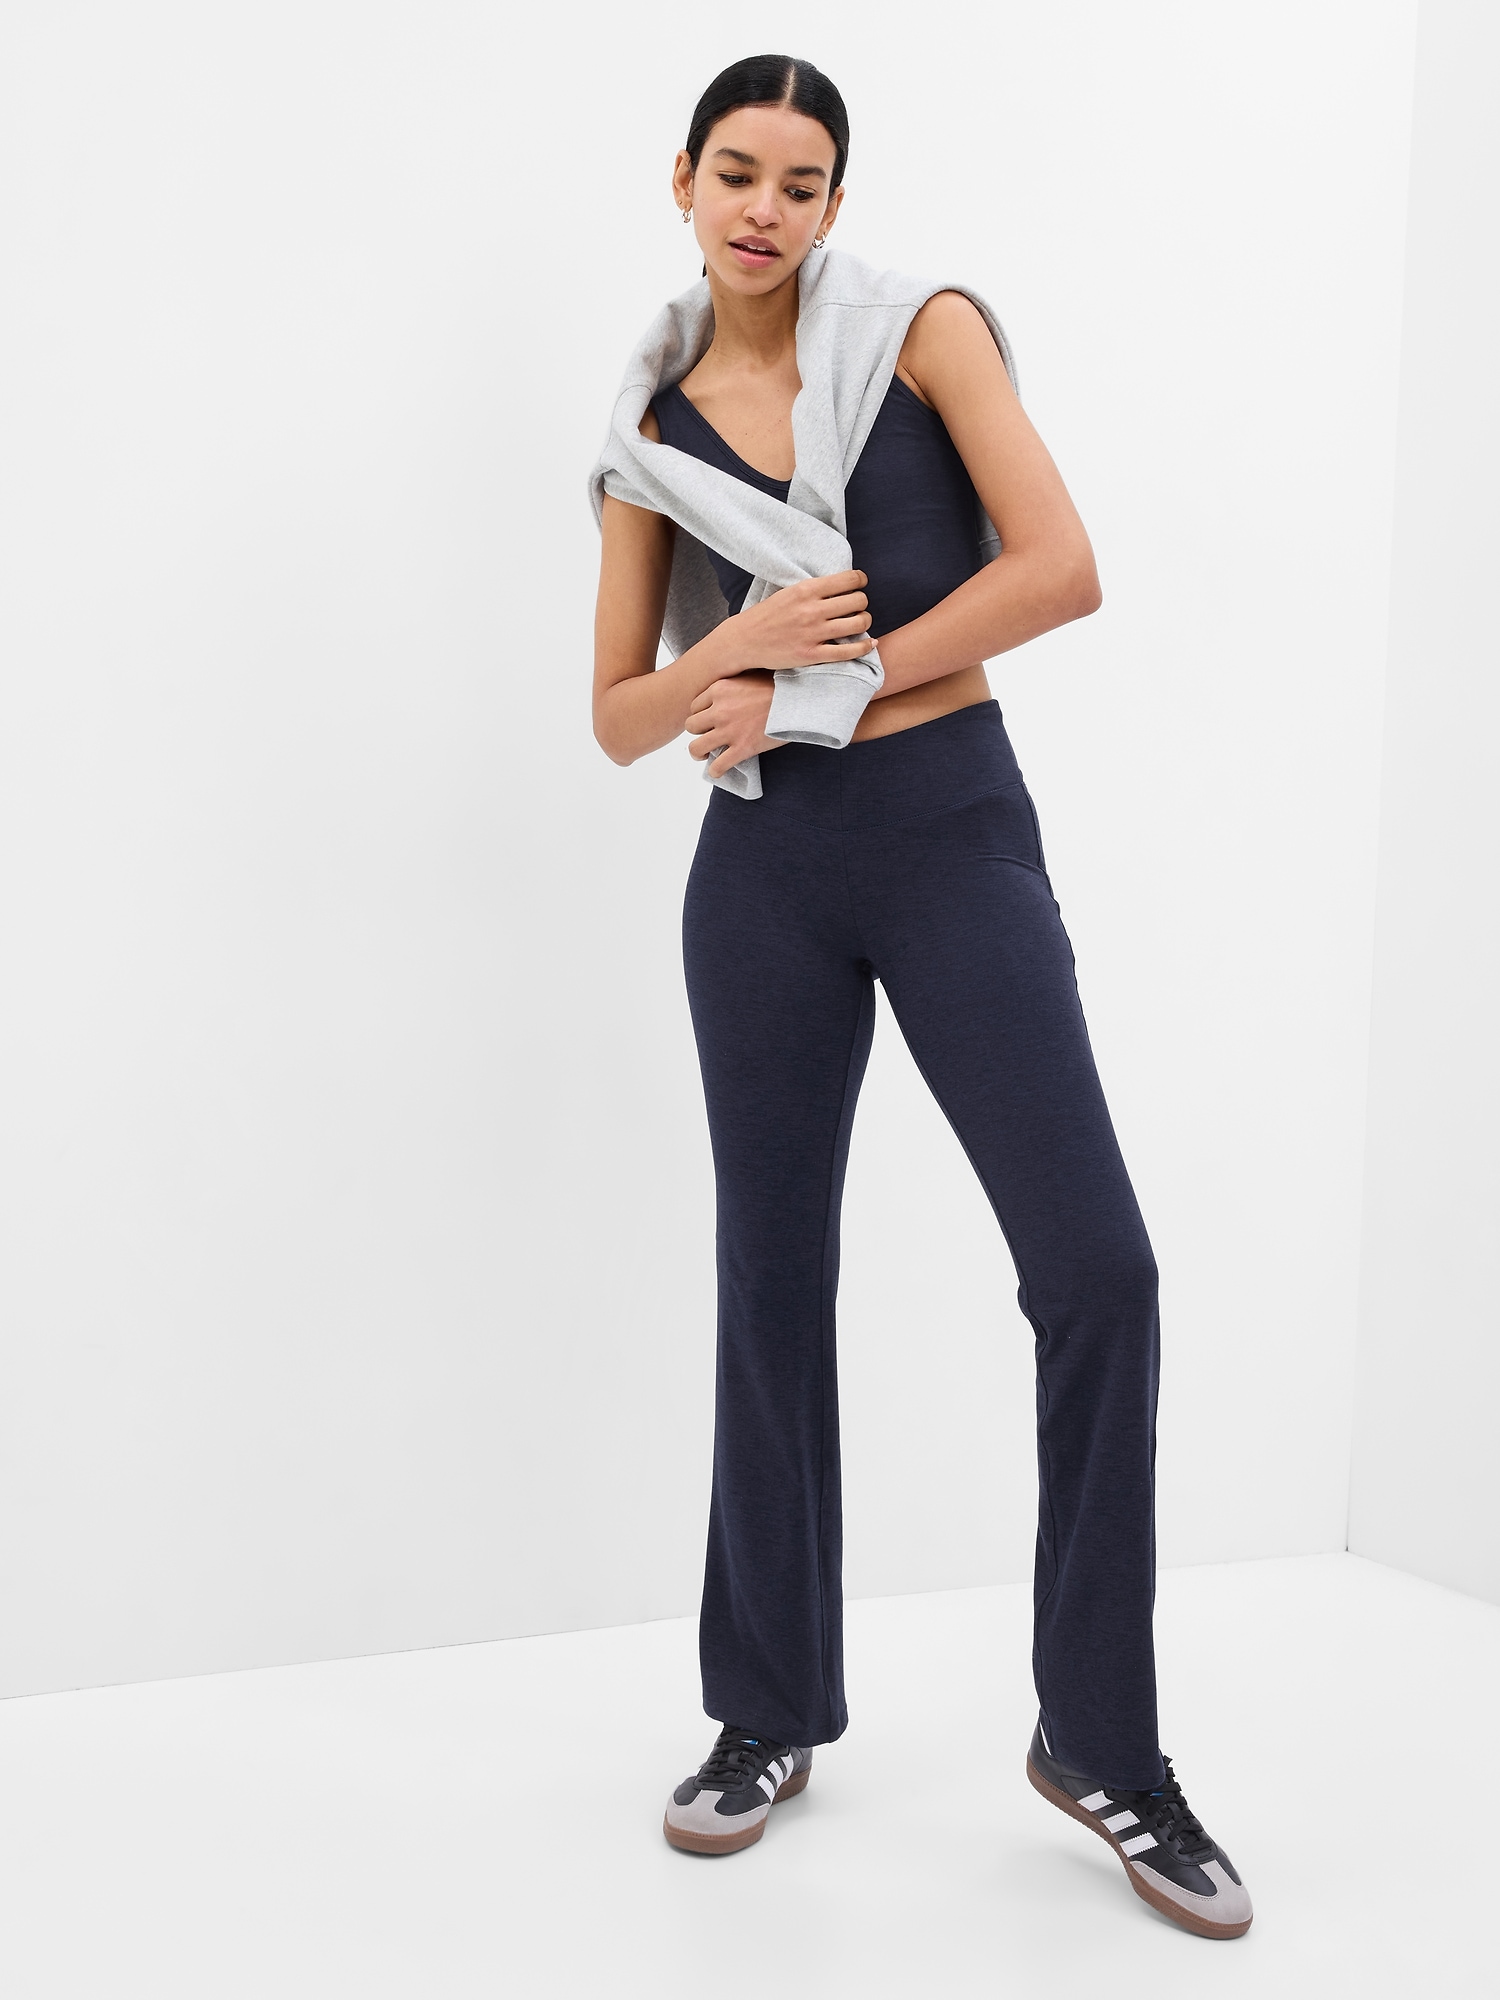 The Fit & Flare Pants